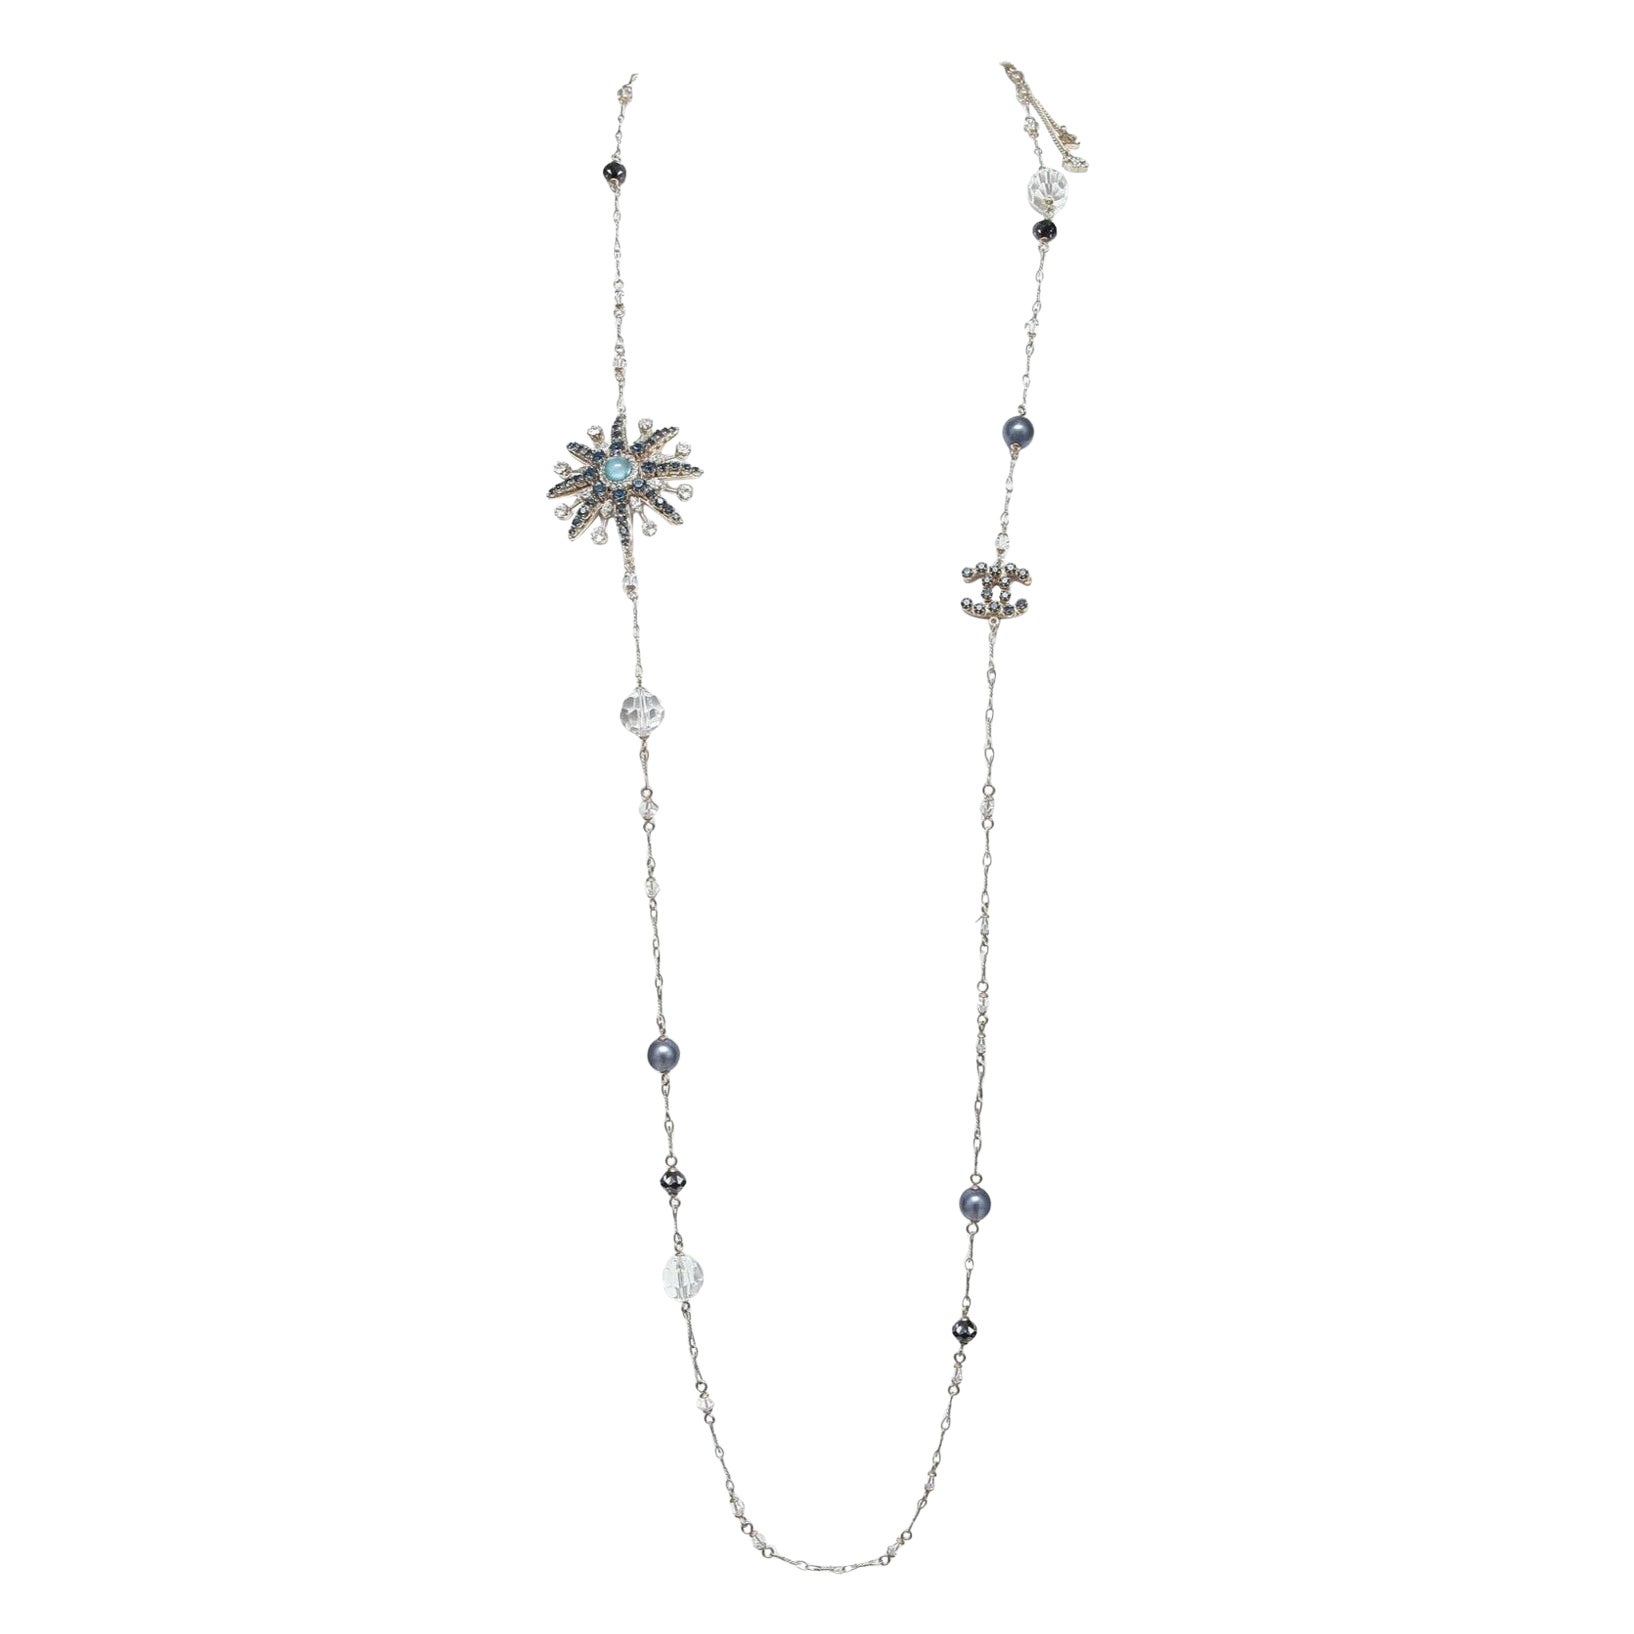 CHANEL Necklace Gold Blue White Crystals Starburst Pearls Charm Chain 2010 For Sale